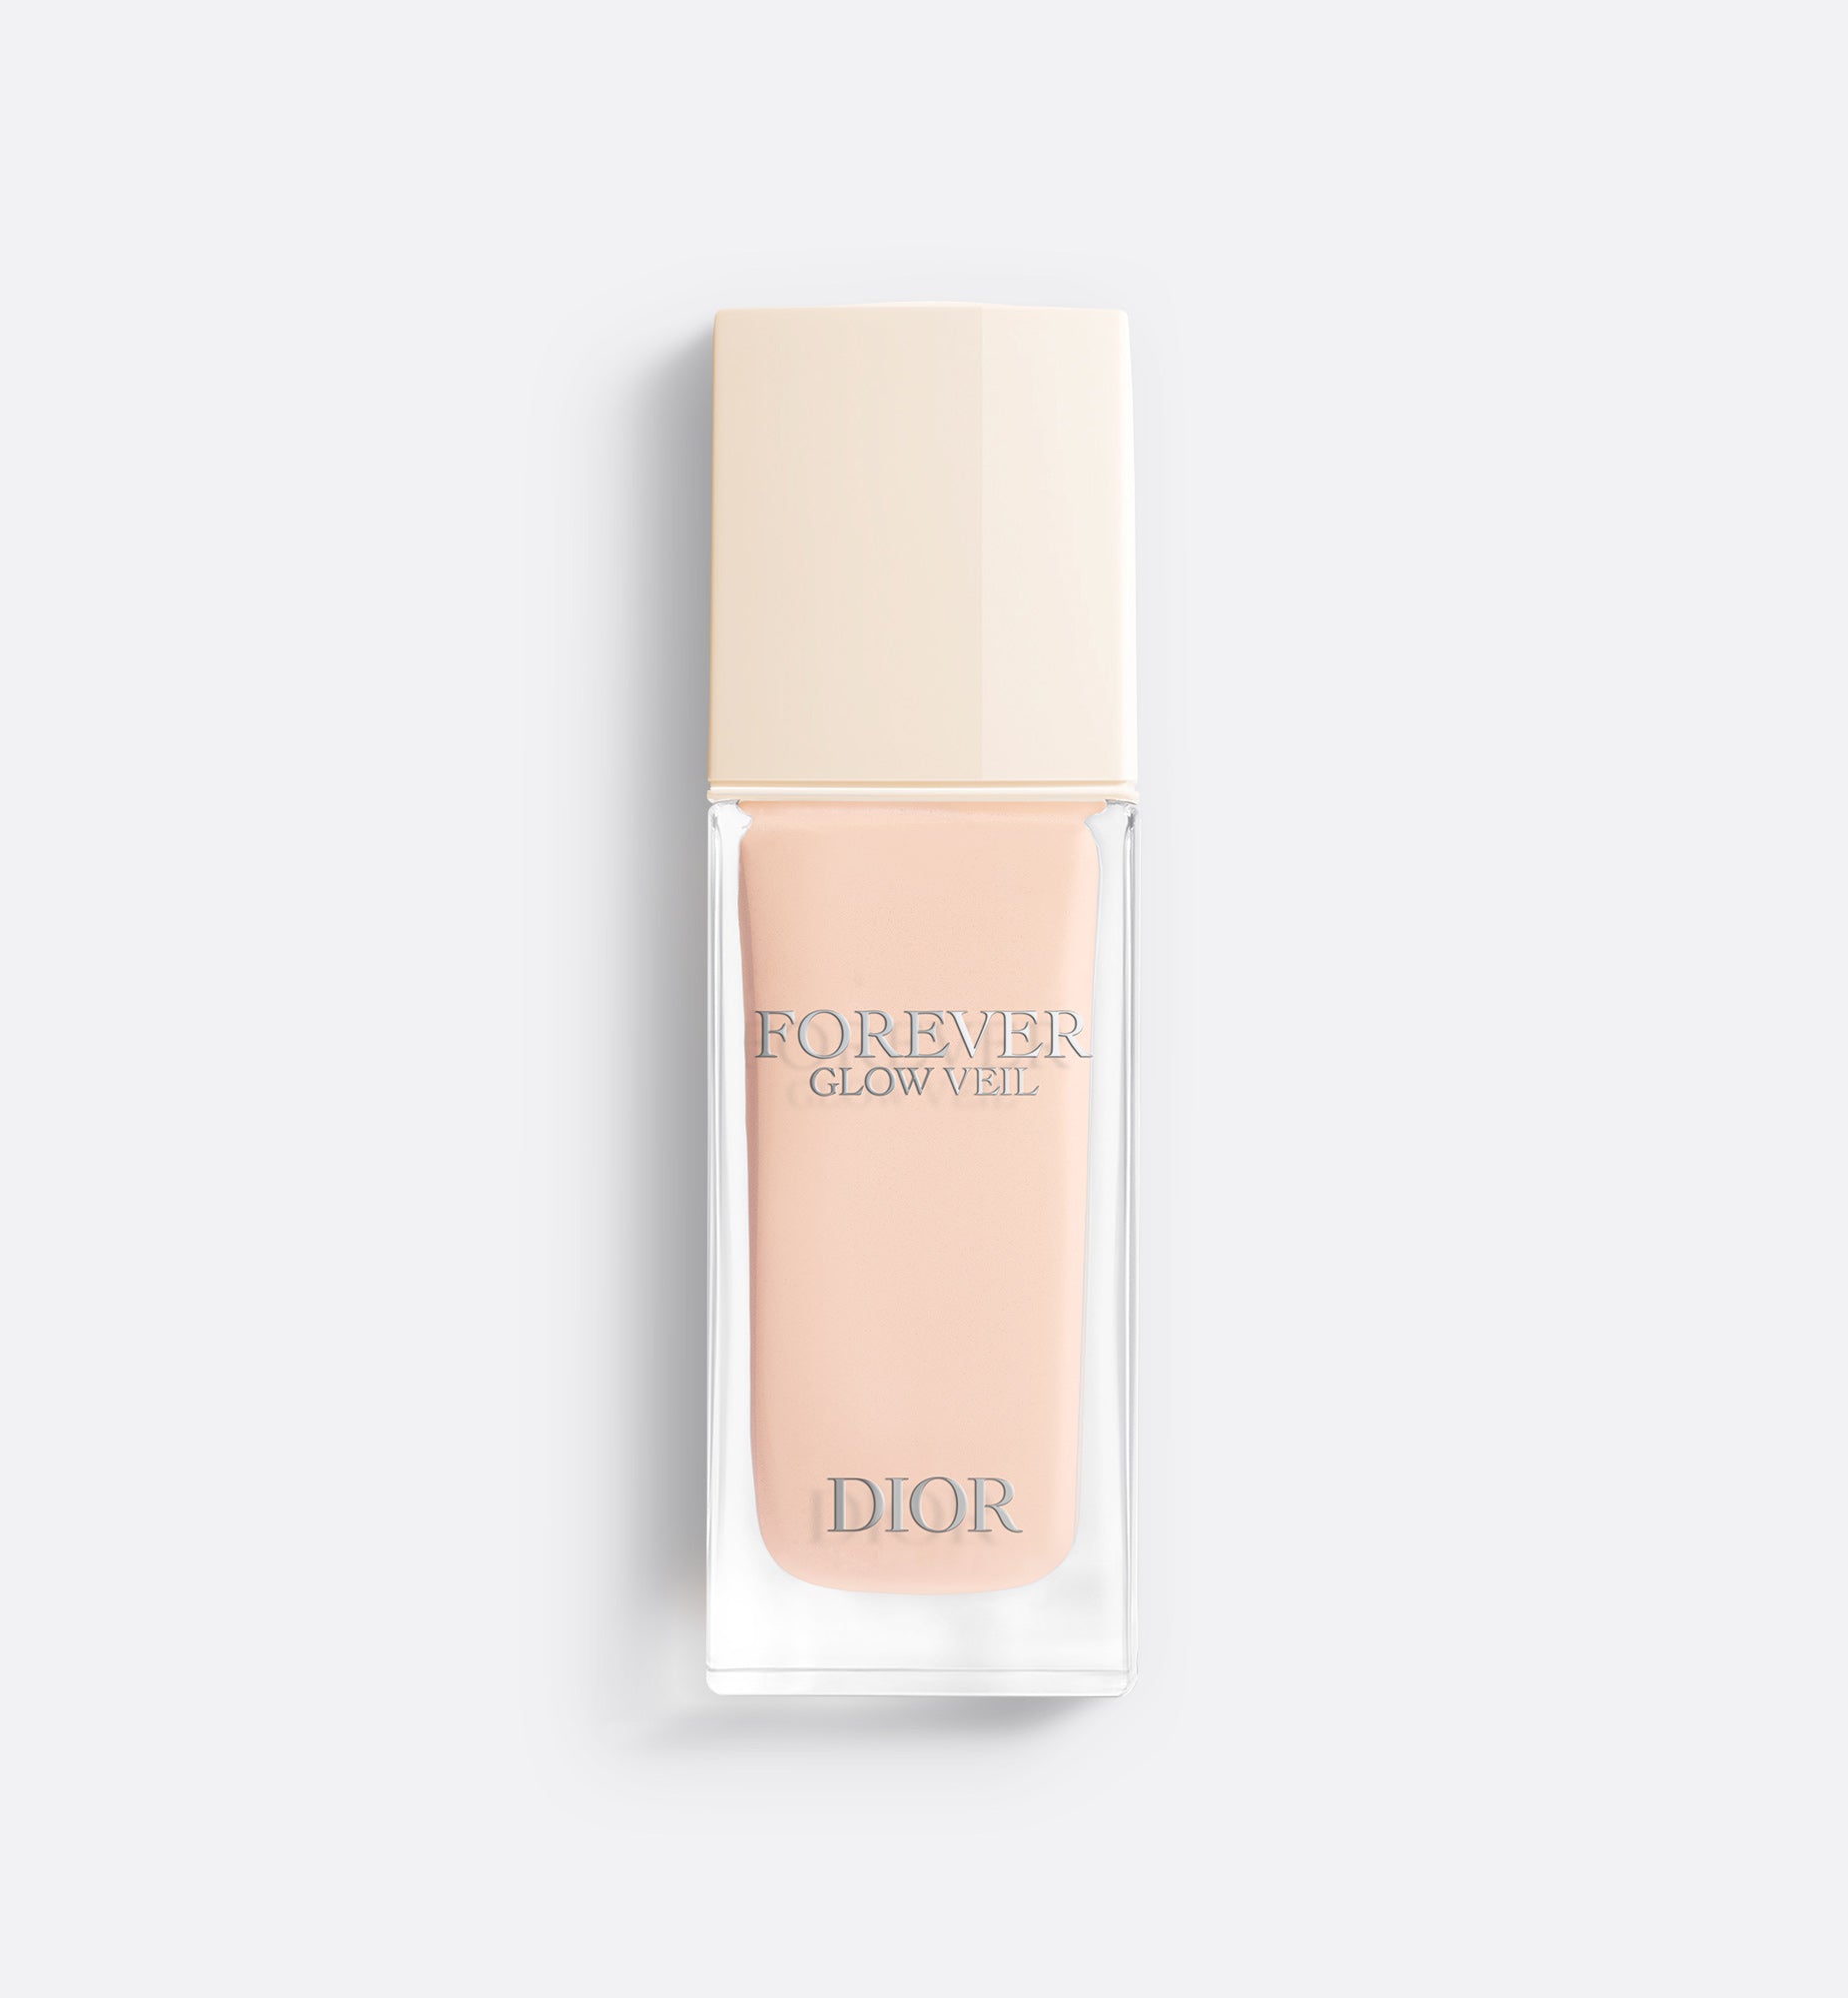 Dior Forever Glow Veil SPF 20 PA++ | 24h Hydration and Radiance Primer - Concentrated in Hyaluronic Acid